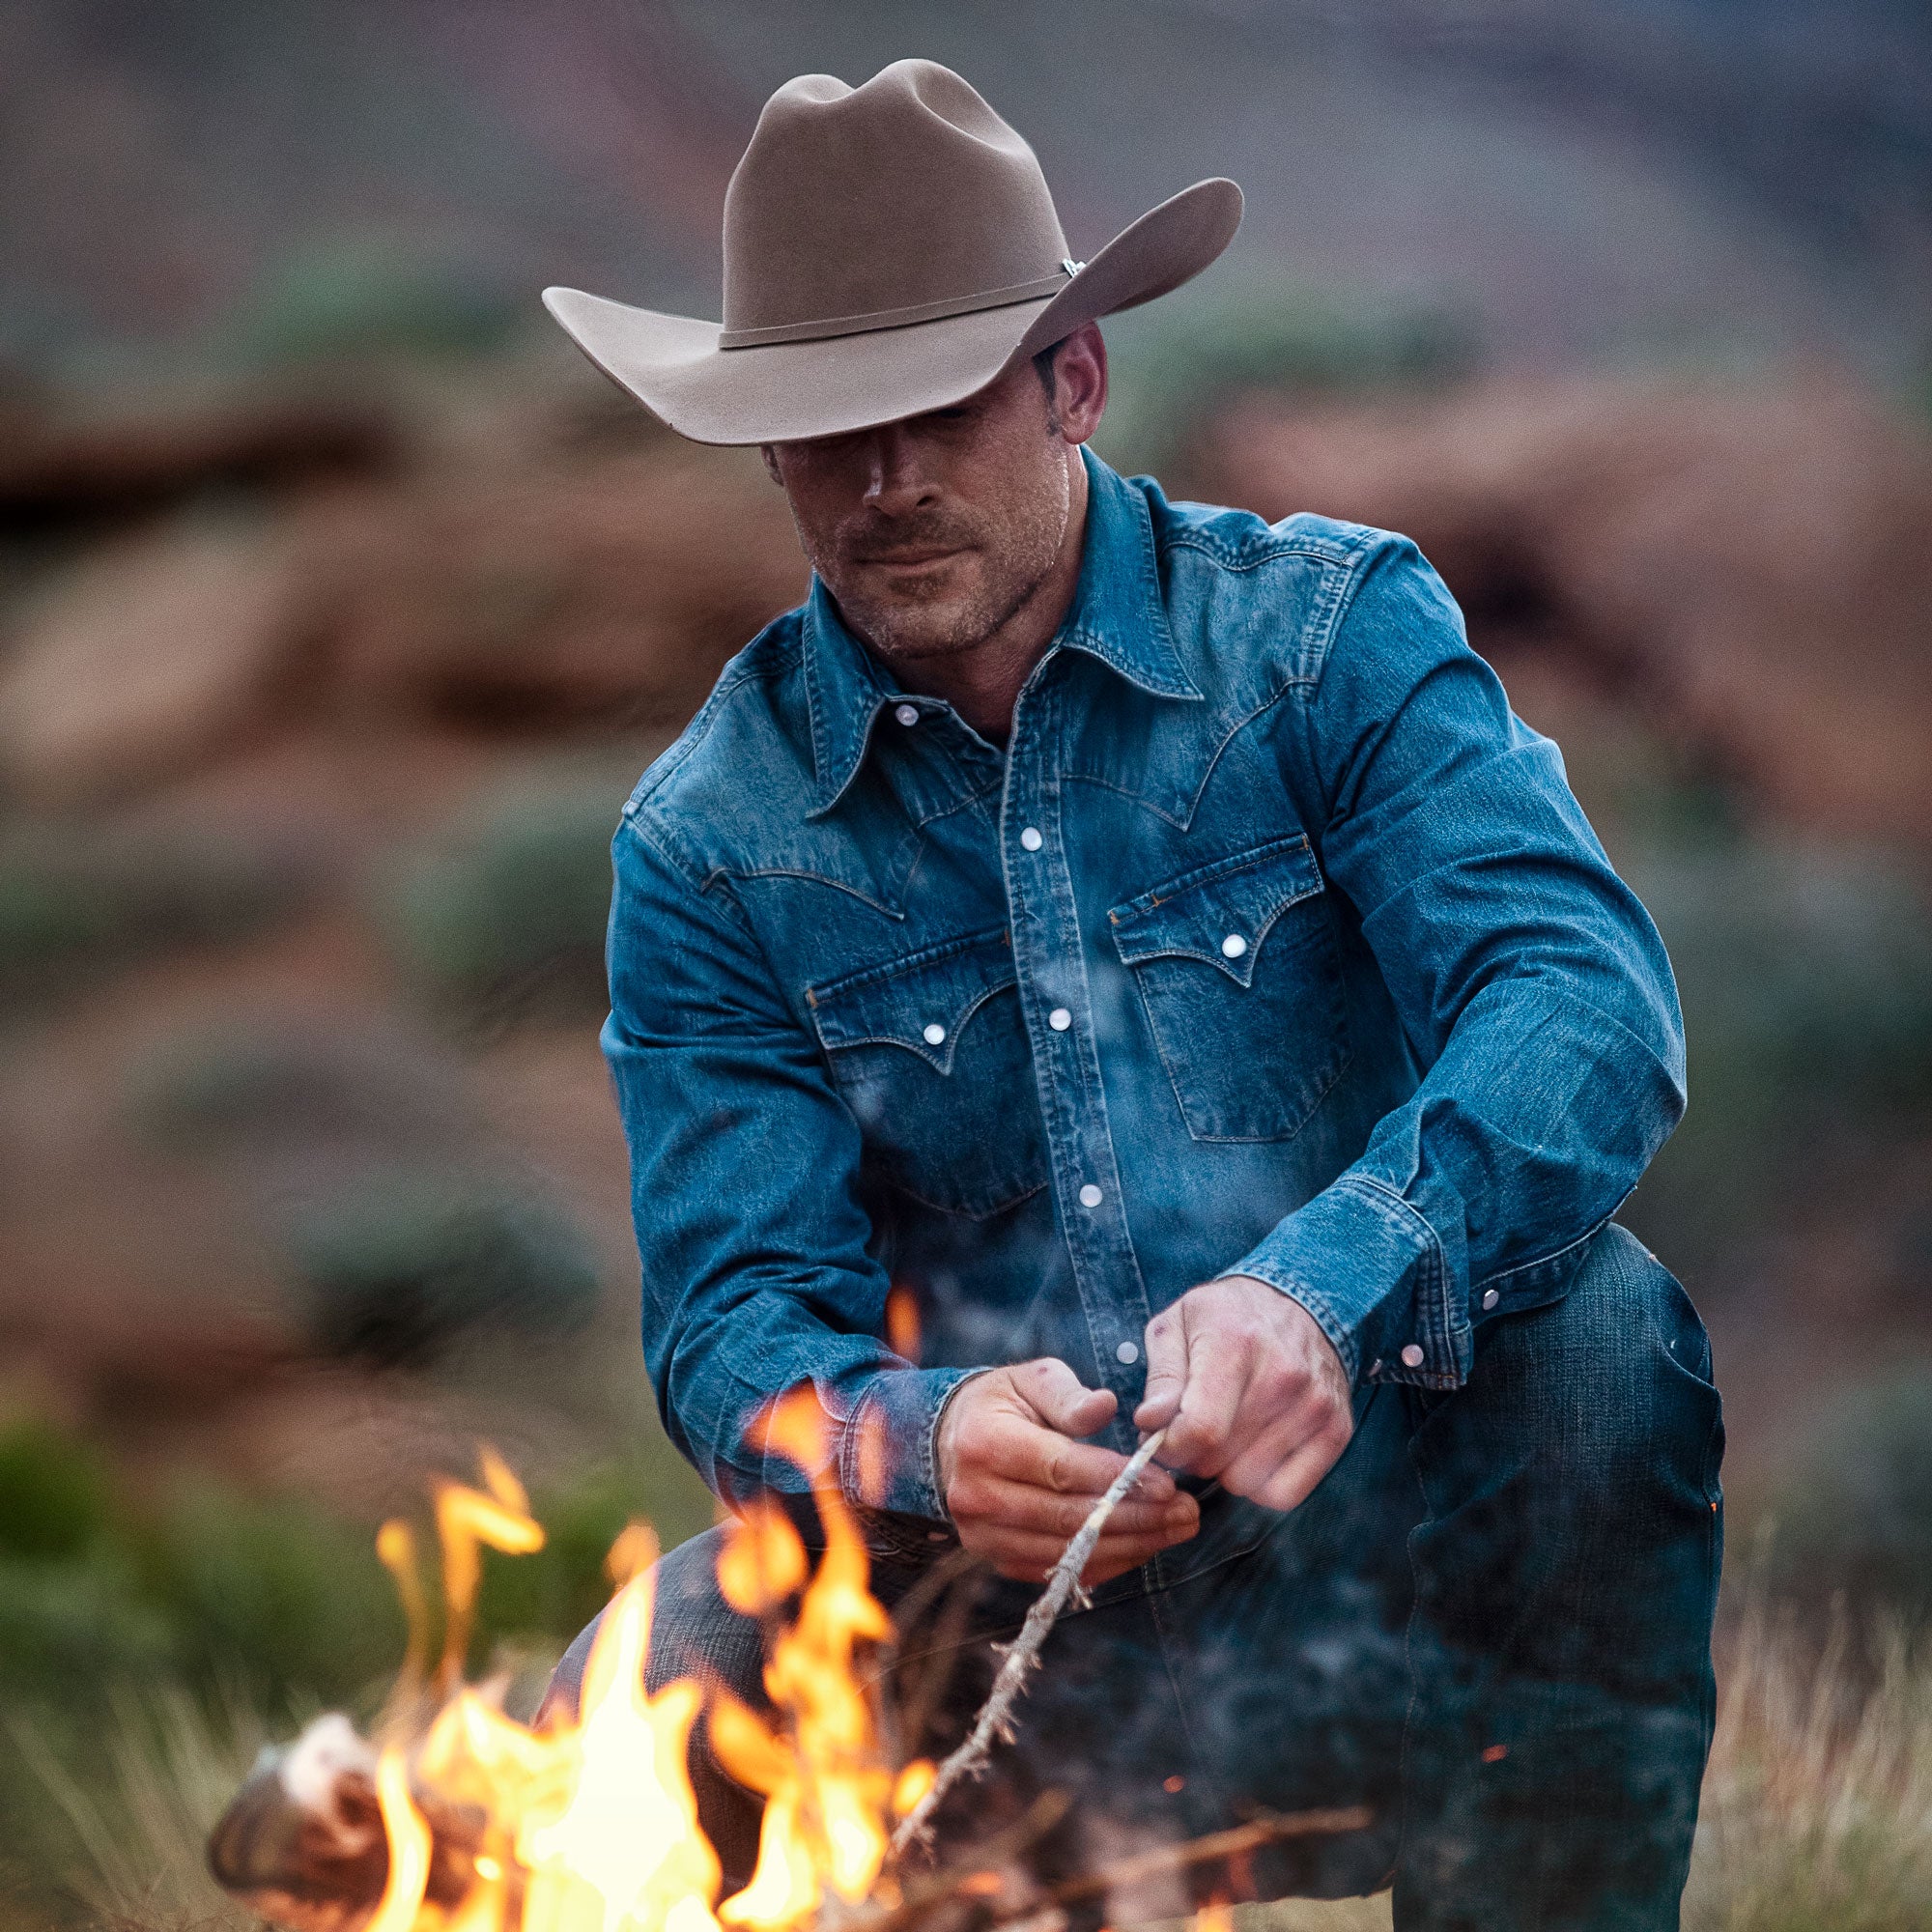 Best Selling Hats - Stetson Official Site